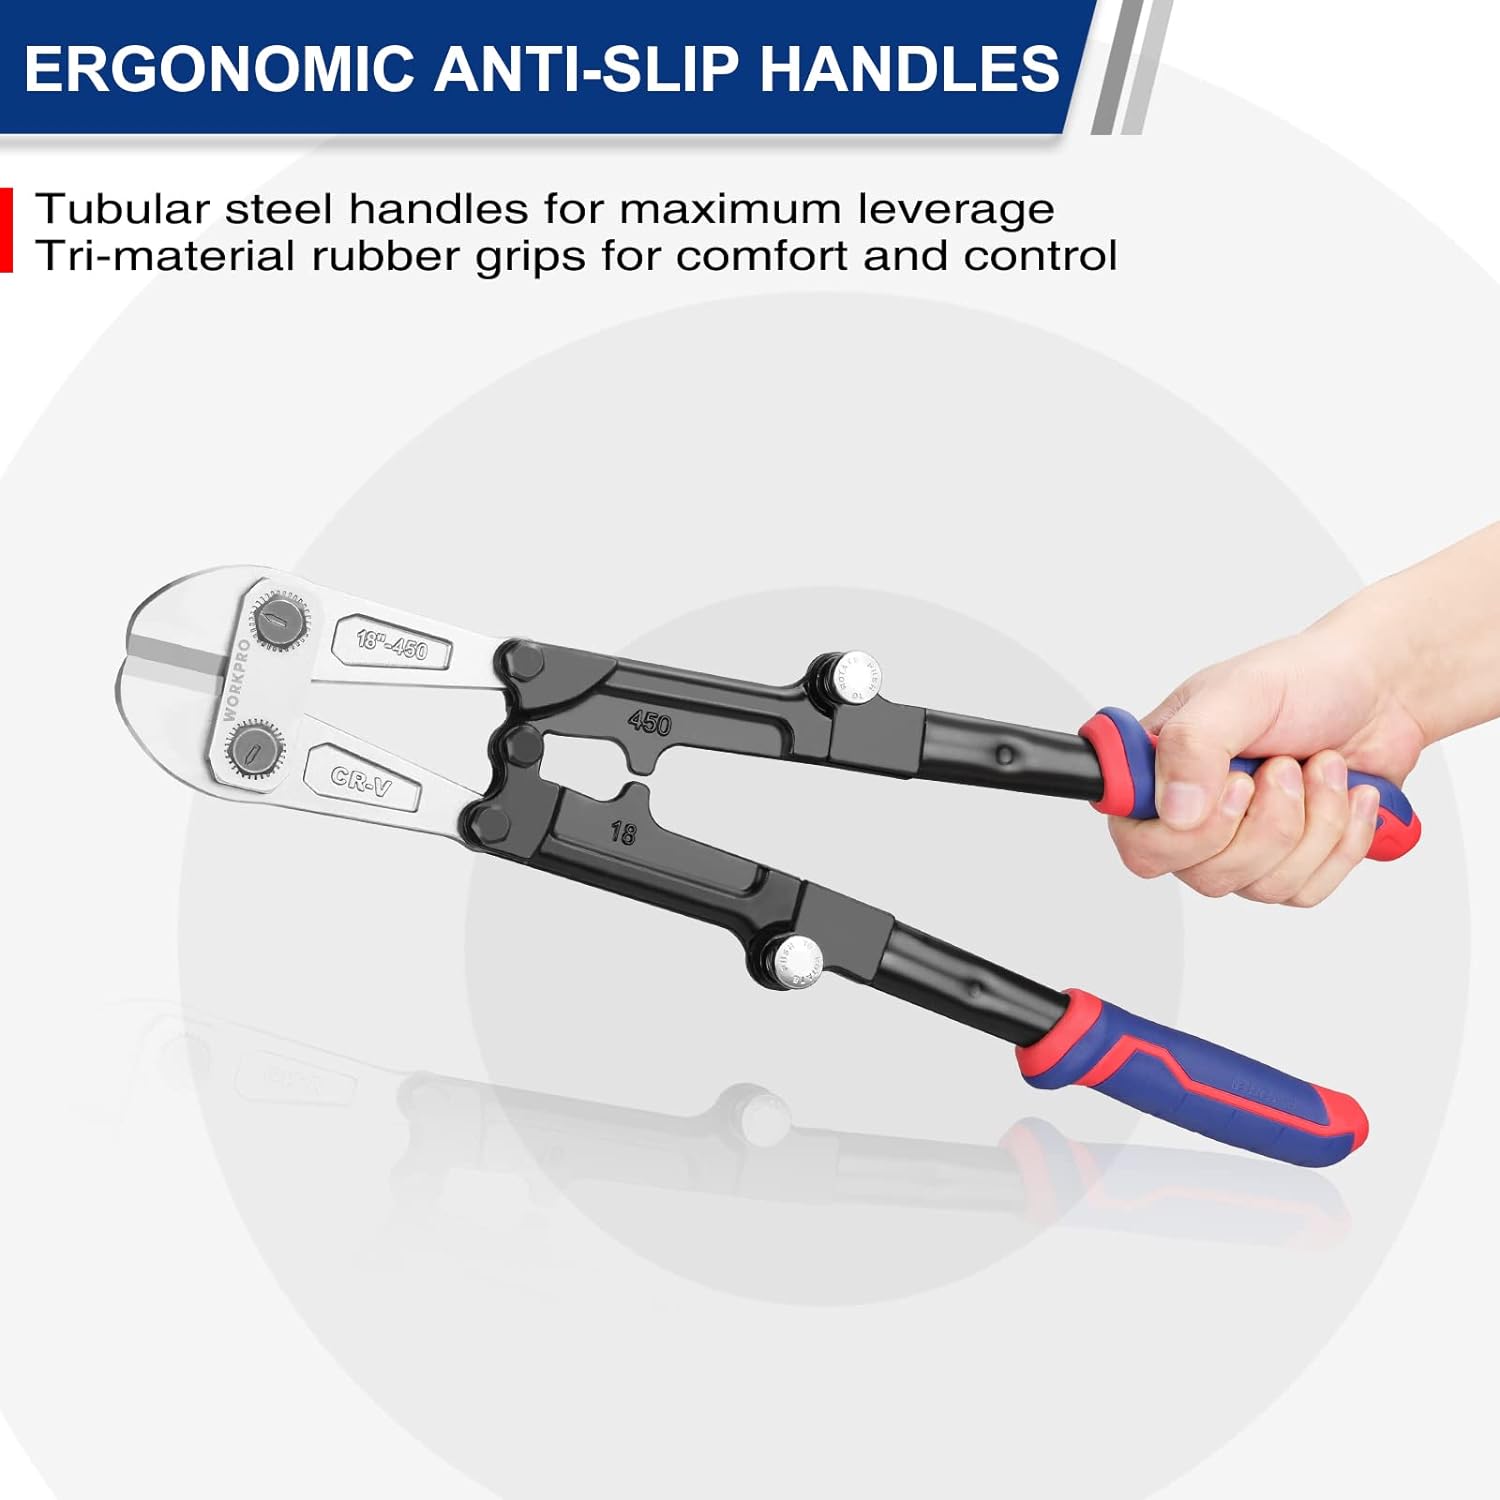 HANGZHOU GREATSTAR INDUSTRIAL  WORKPRO 18-Inch Foldable Bolt Cutter, Tri-Material Handle with Comfort Grip, Chrome Vanadium Steel Blade, for Rods, Bolts, Rive